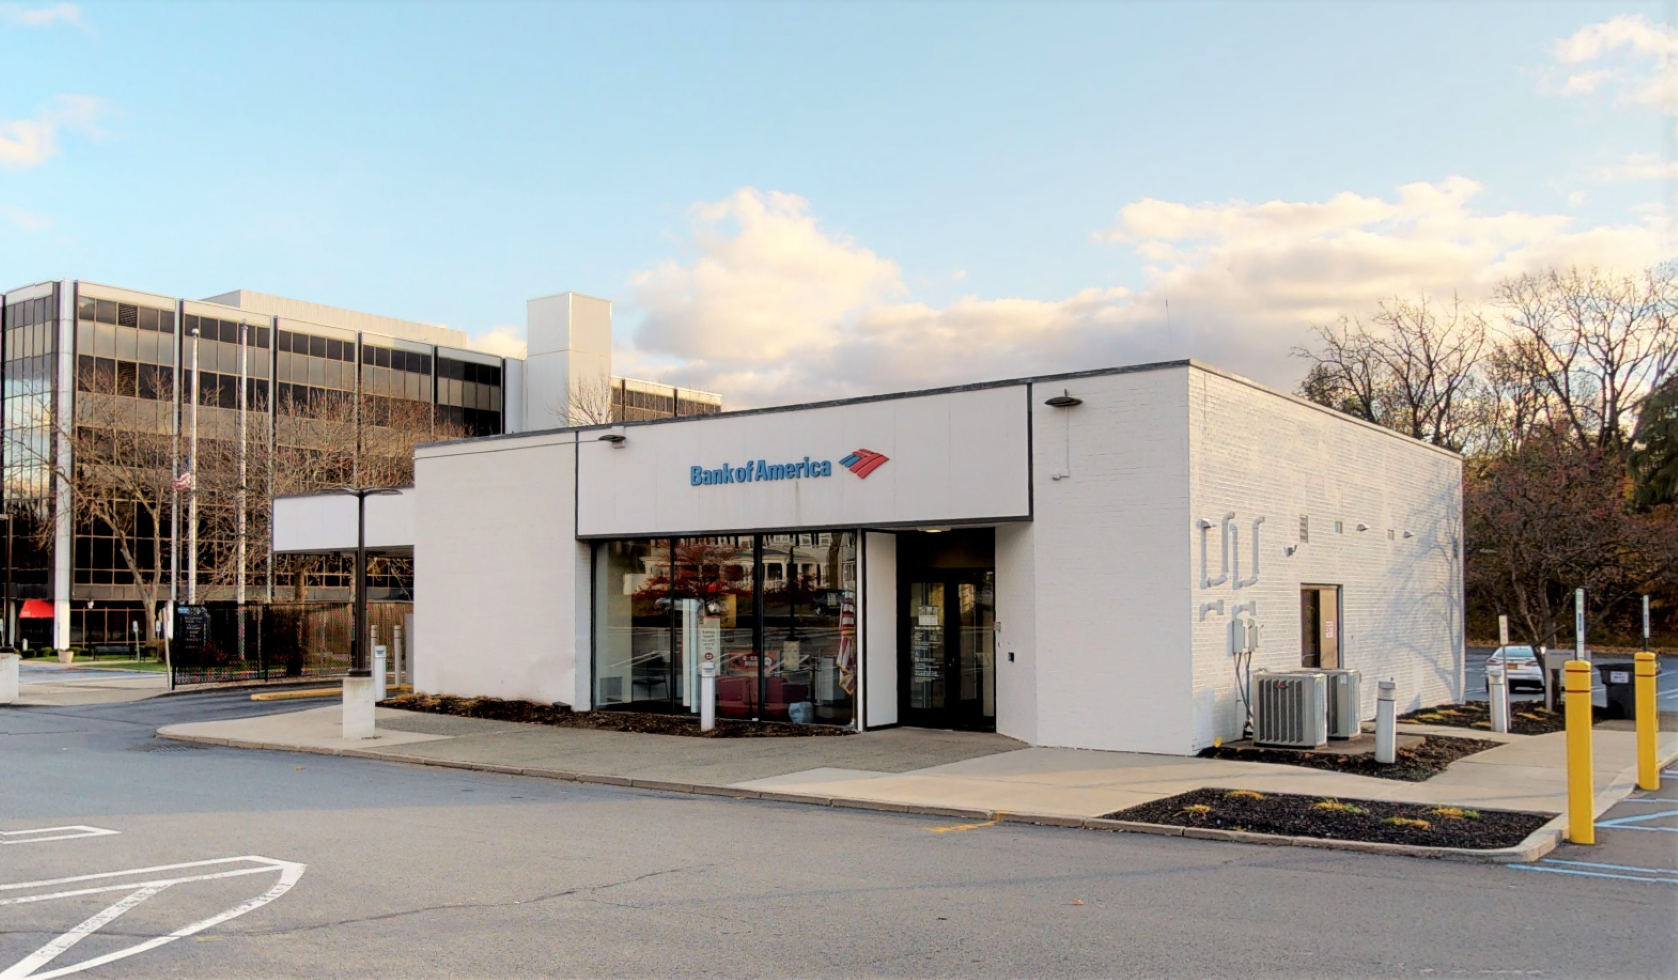 Bank of America financial center with drive-thru ATM | 1450 Western Ave, Albany, NY 12203